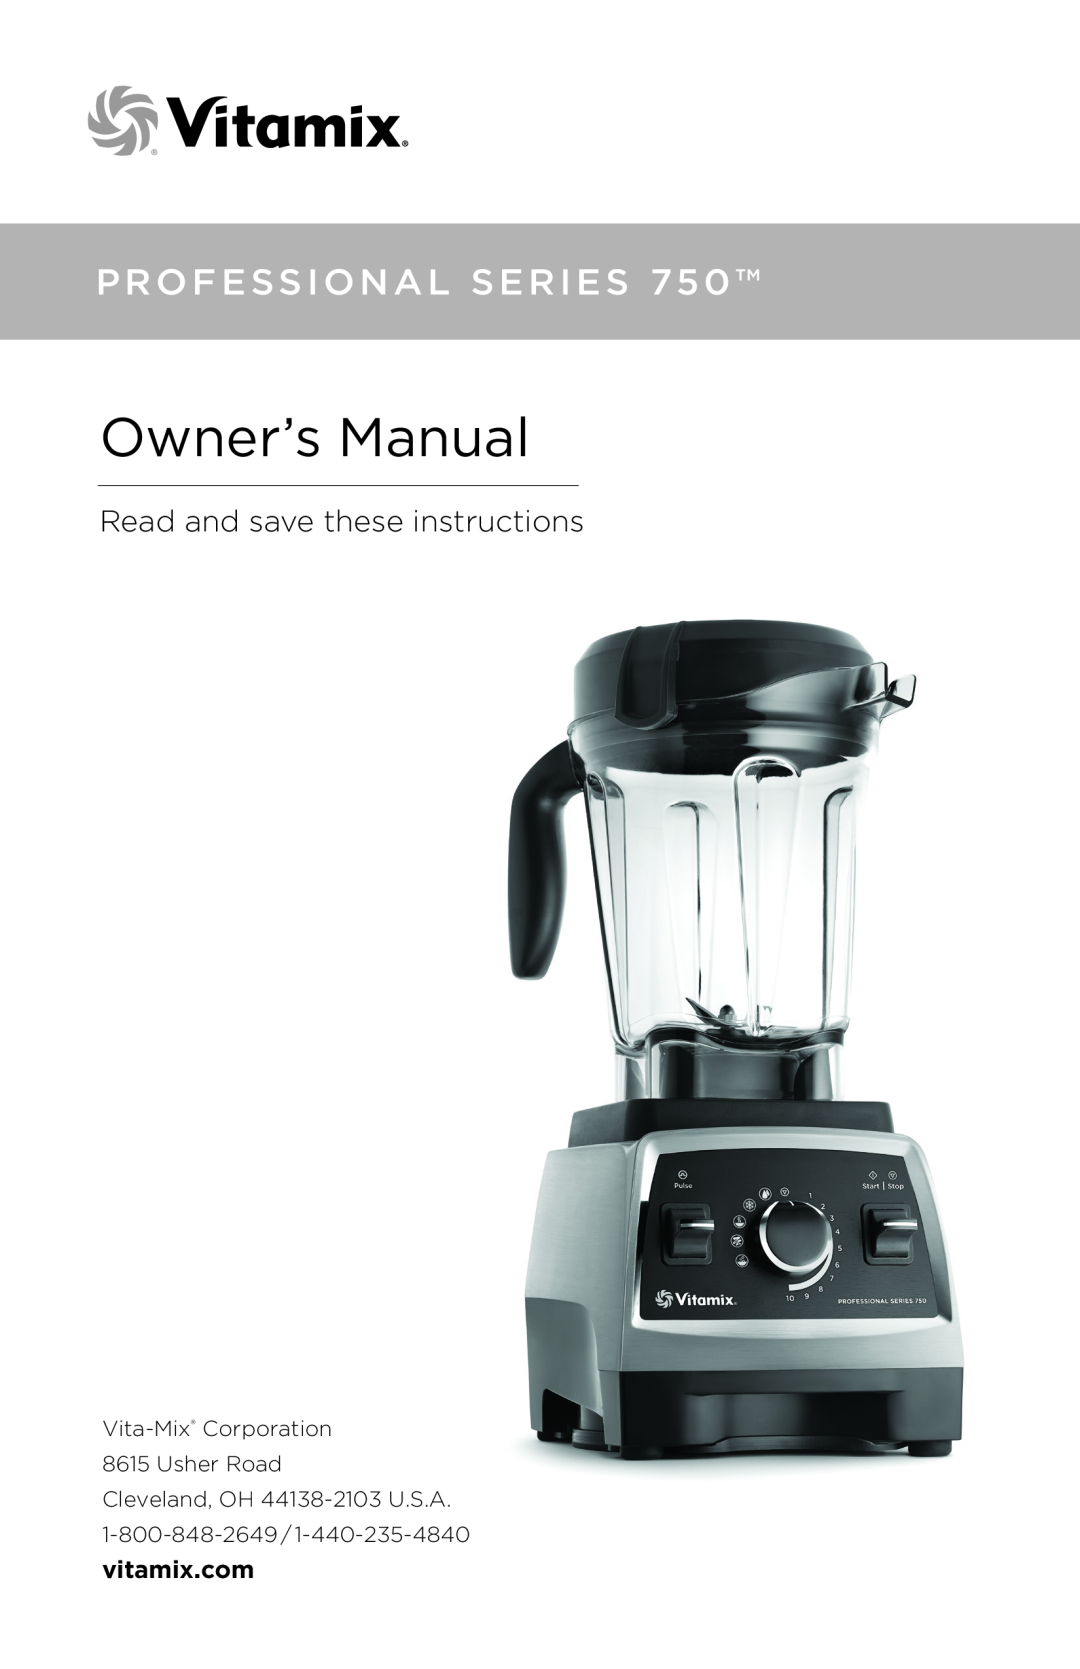 Vita-Mix PROFESSIONAL SERIES 750 manual Professional Series, Read and save these instructions, vitamix.com 